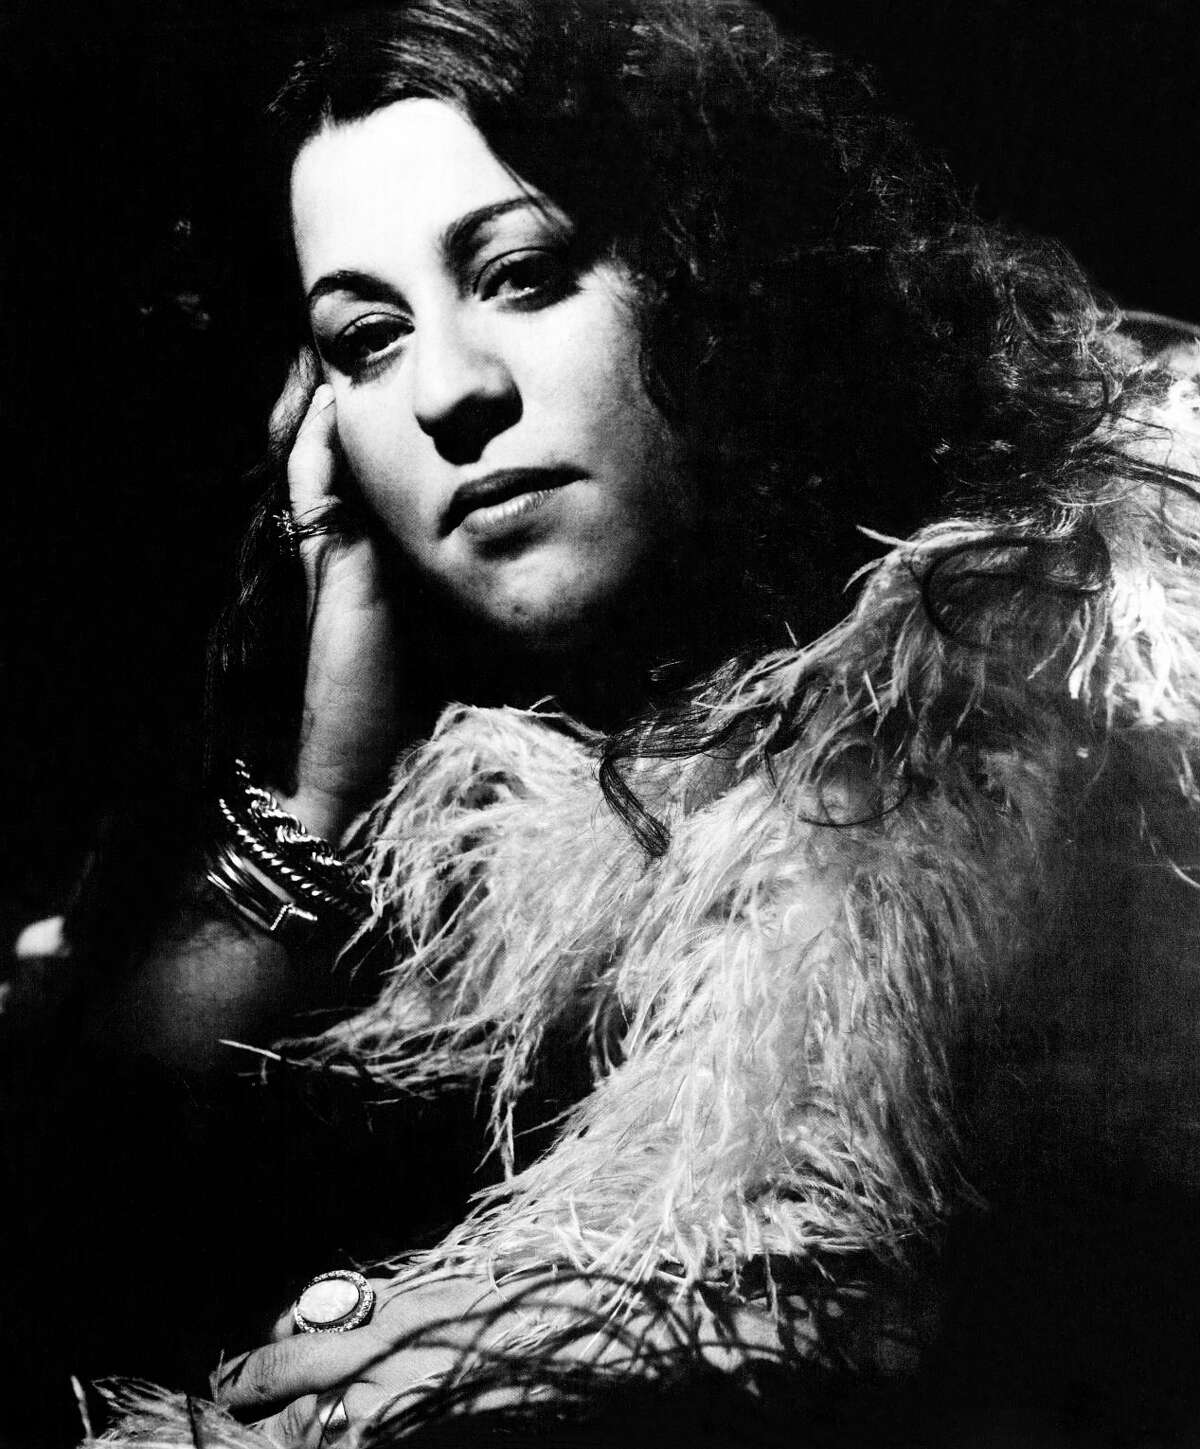 Mama Cass Elliot: The most popular member of the famed '60s group The Mamas and the Papas died choking on a ham sandwich. At least that's what caught on in popular culture before the truth really came out. A ham sandwich was found next to her bed in her London apartment when her body was discovered. And between the coroner and the press, word got out that she choked to death — which added to more fat shaming given her notable large size. Columnist Sue Cameron told People Magazine in 2020 that it wasn't a ham sandwich that killed the Rock & Roll Hall of Famer, but a heart attack. She told the popular publication that she spoke to Elliot's manager a few days after she was discovered deceased and insisted that she write and put out that the cause of death was a ham sandwich because half a sandwich was found on the nightstand. It's since been revealed that Elliot's fad diets, drug use and weight issues contributed to her death.